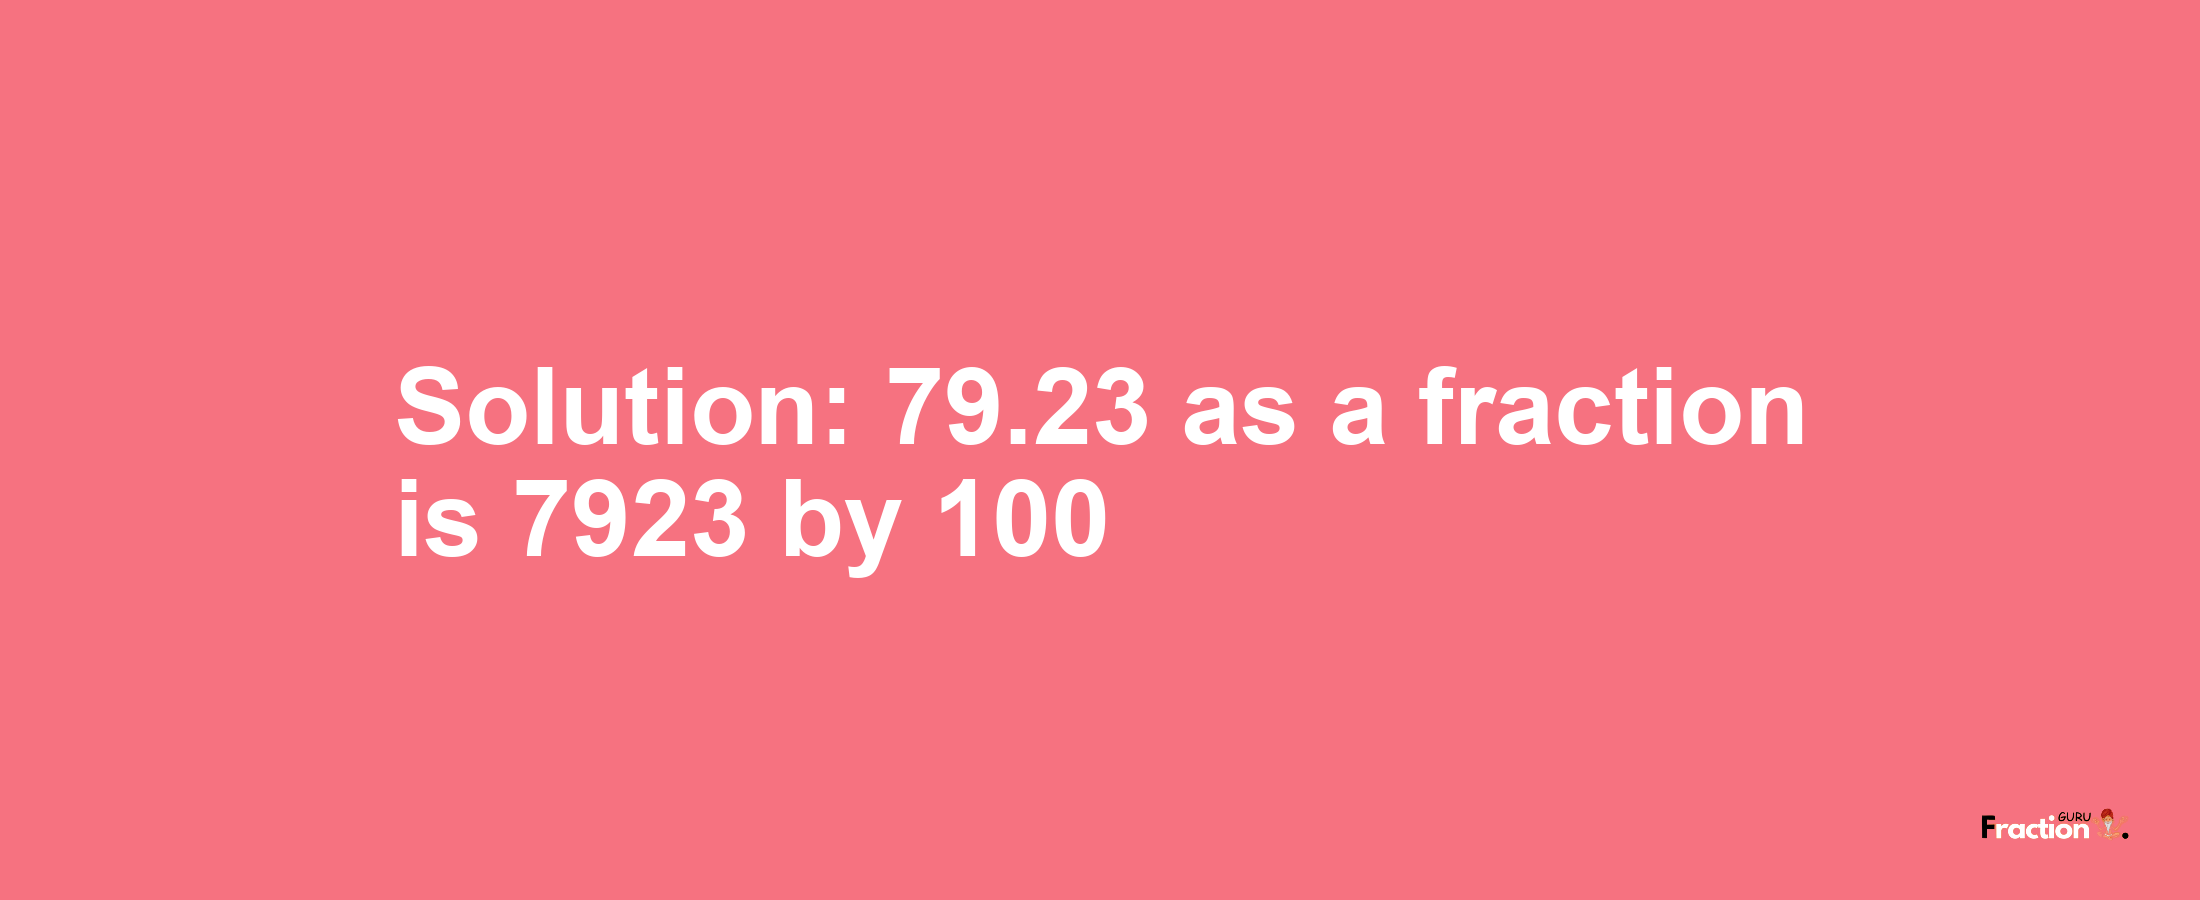 Solution:79.23 as a fraction is 7923/100